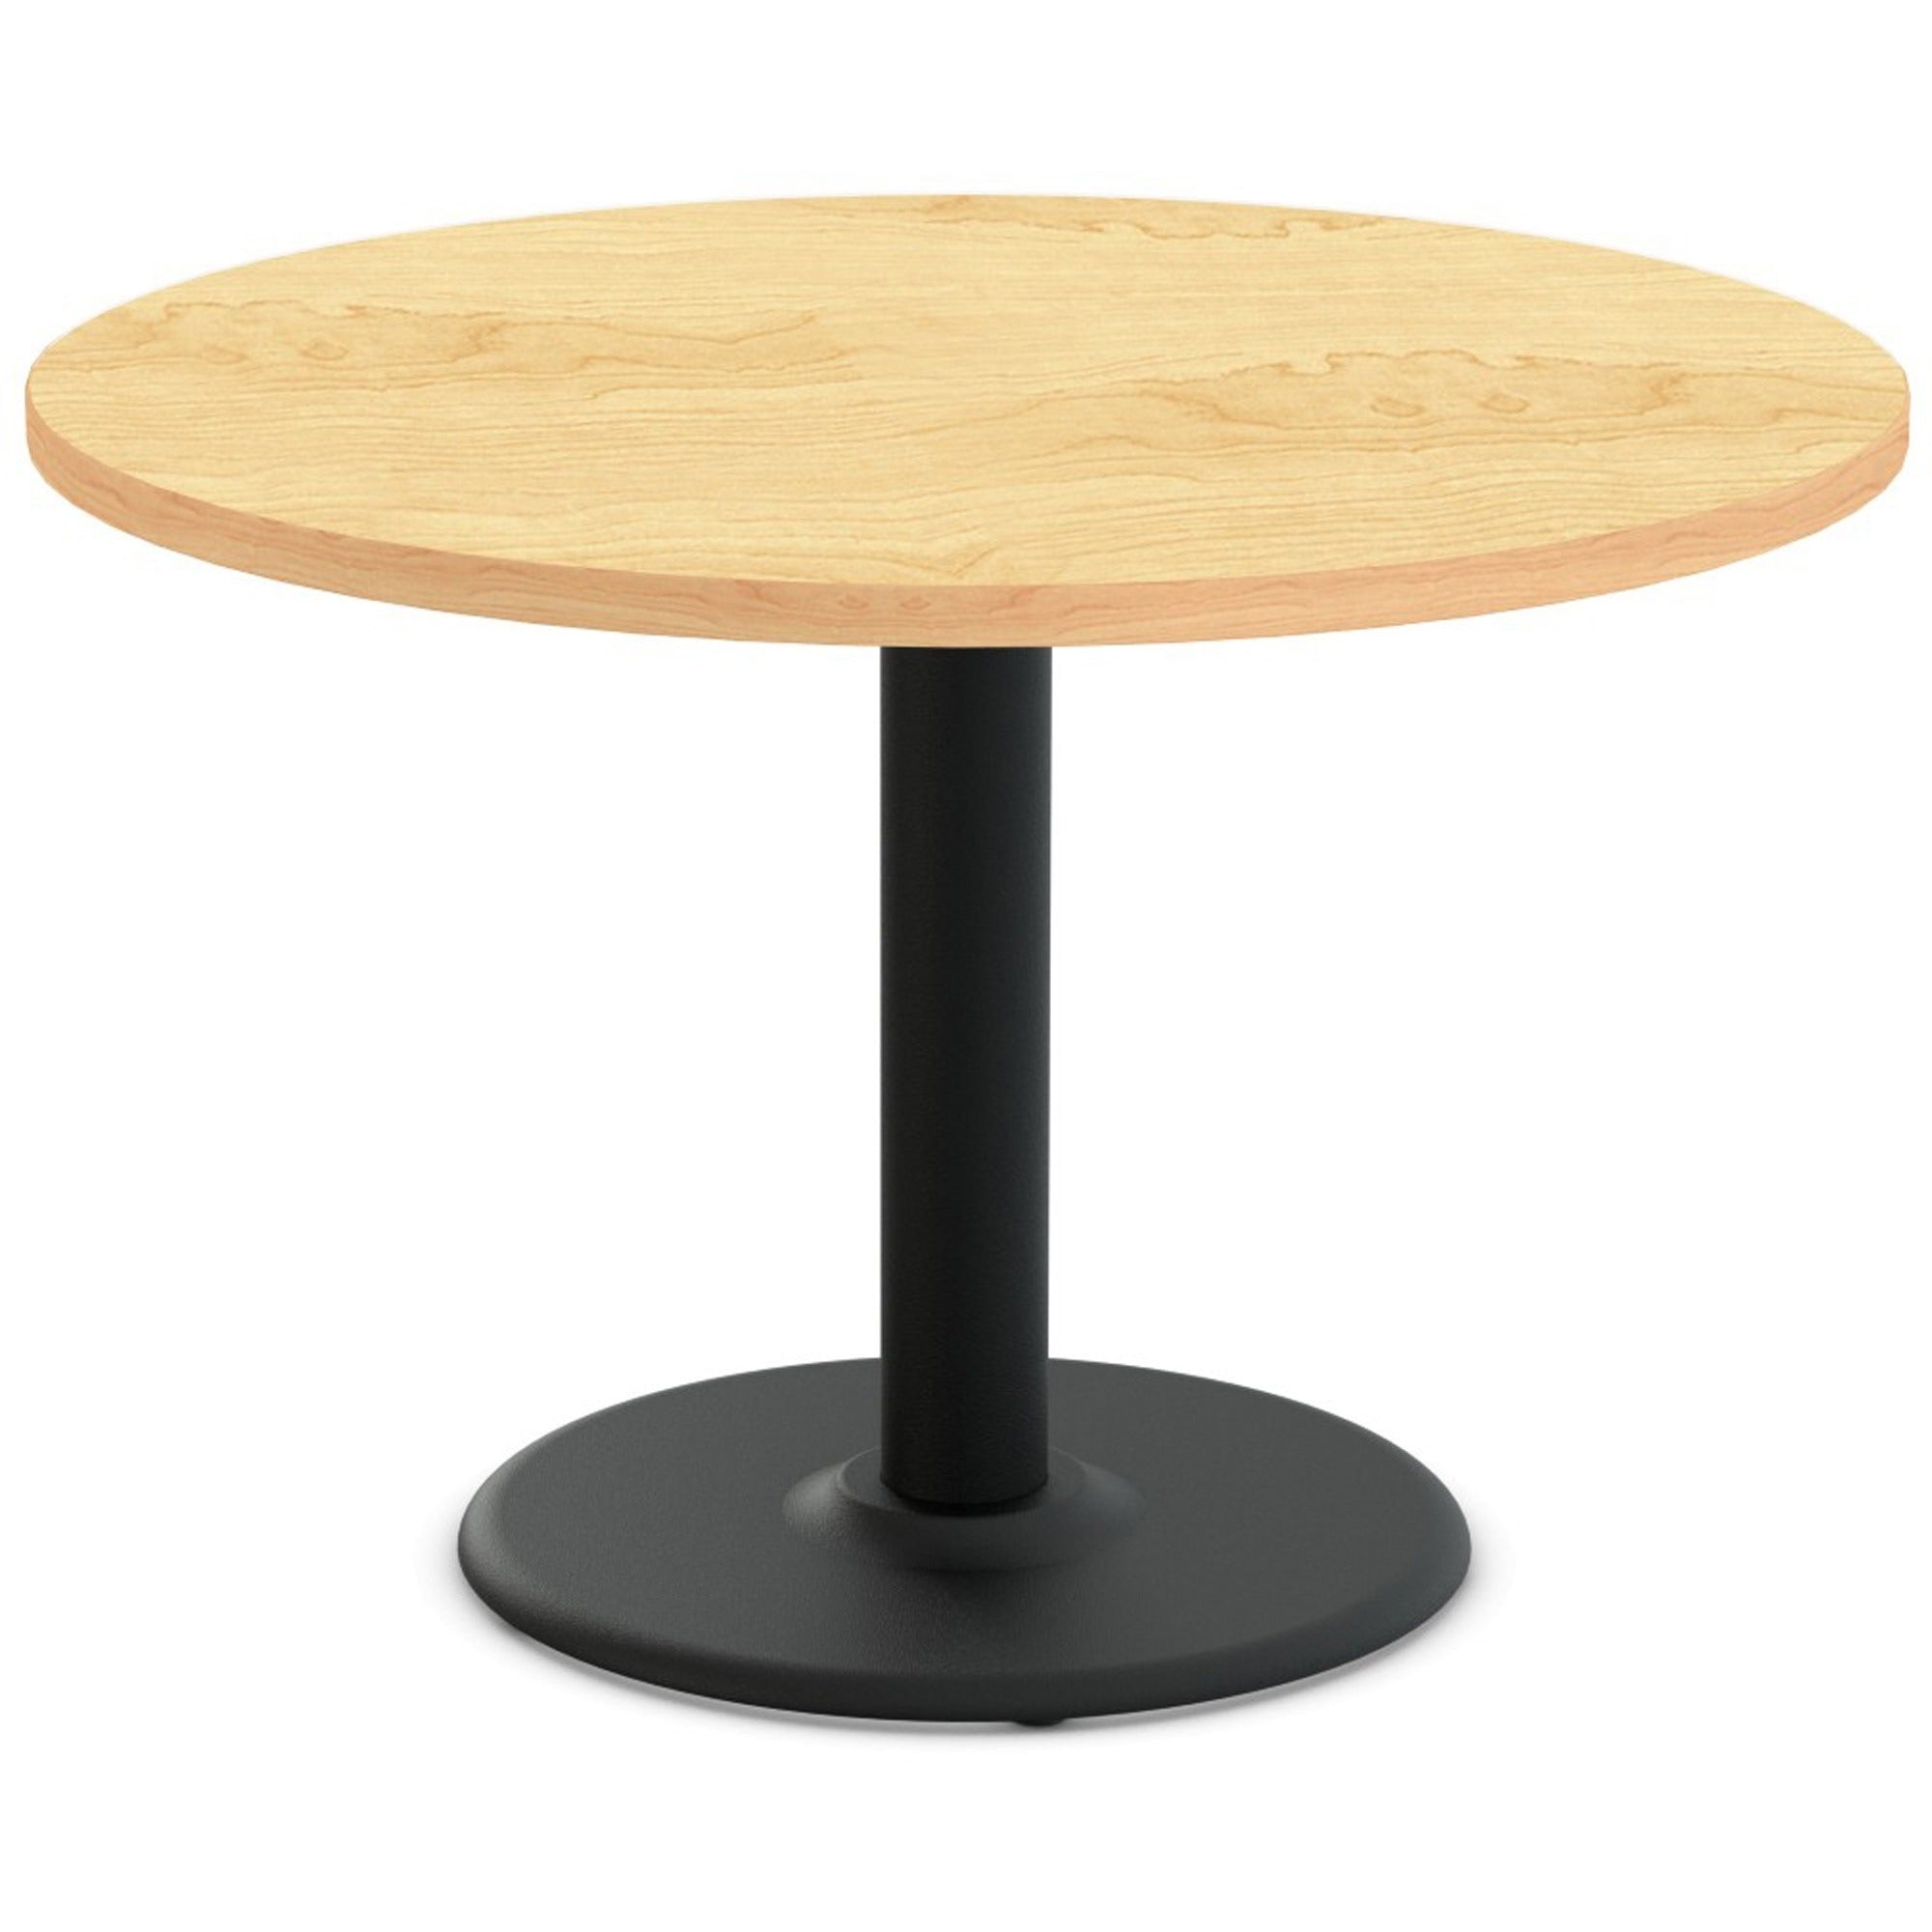 special-t-cantina-2-dining-table-for-table-topcrema-maple-round-top-black-wrinkle-powder-coated-base-x-42-table-top-diameter-42-height-assembly-required-thermofused-laminate-tfl-top-material-1-each_sctcant242bhbcm - 1